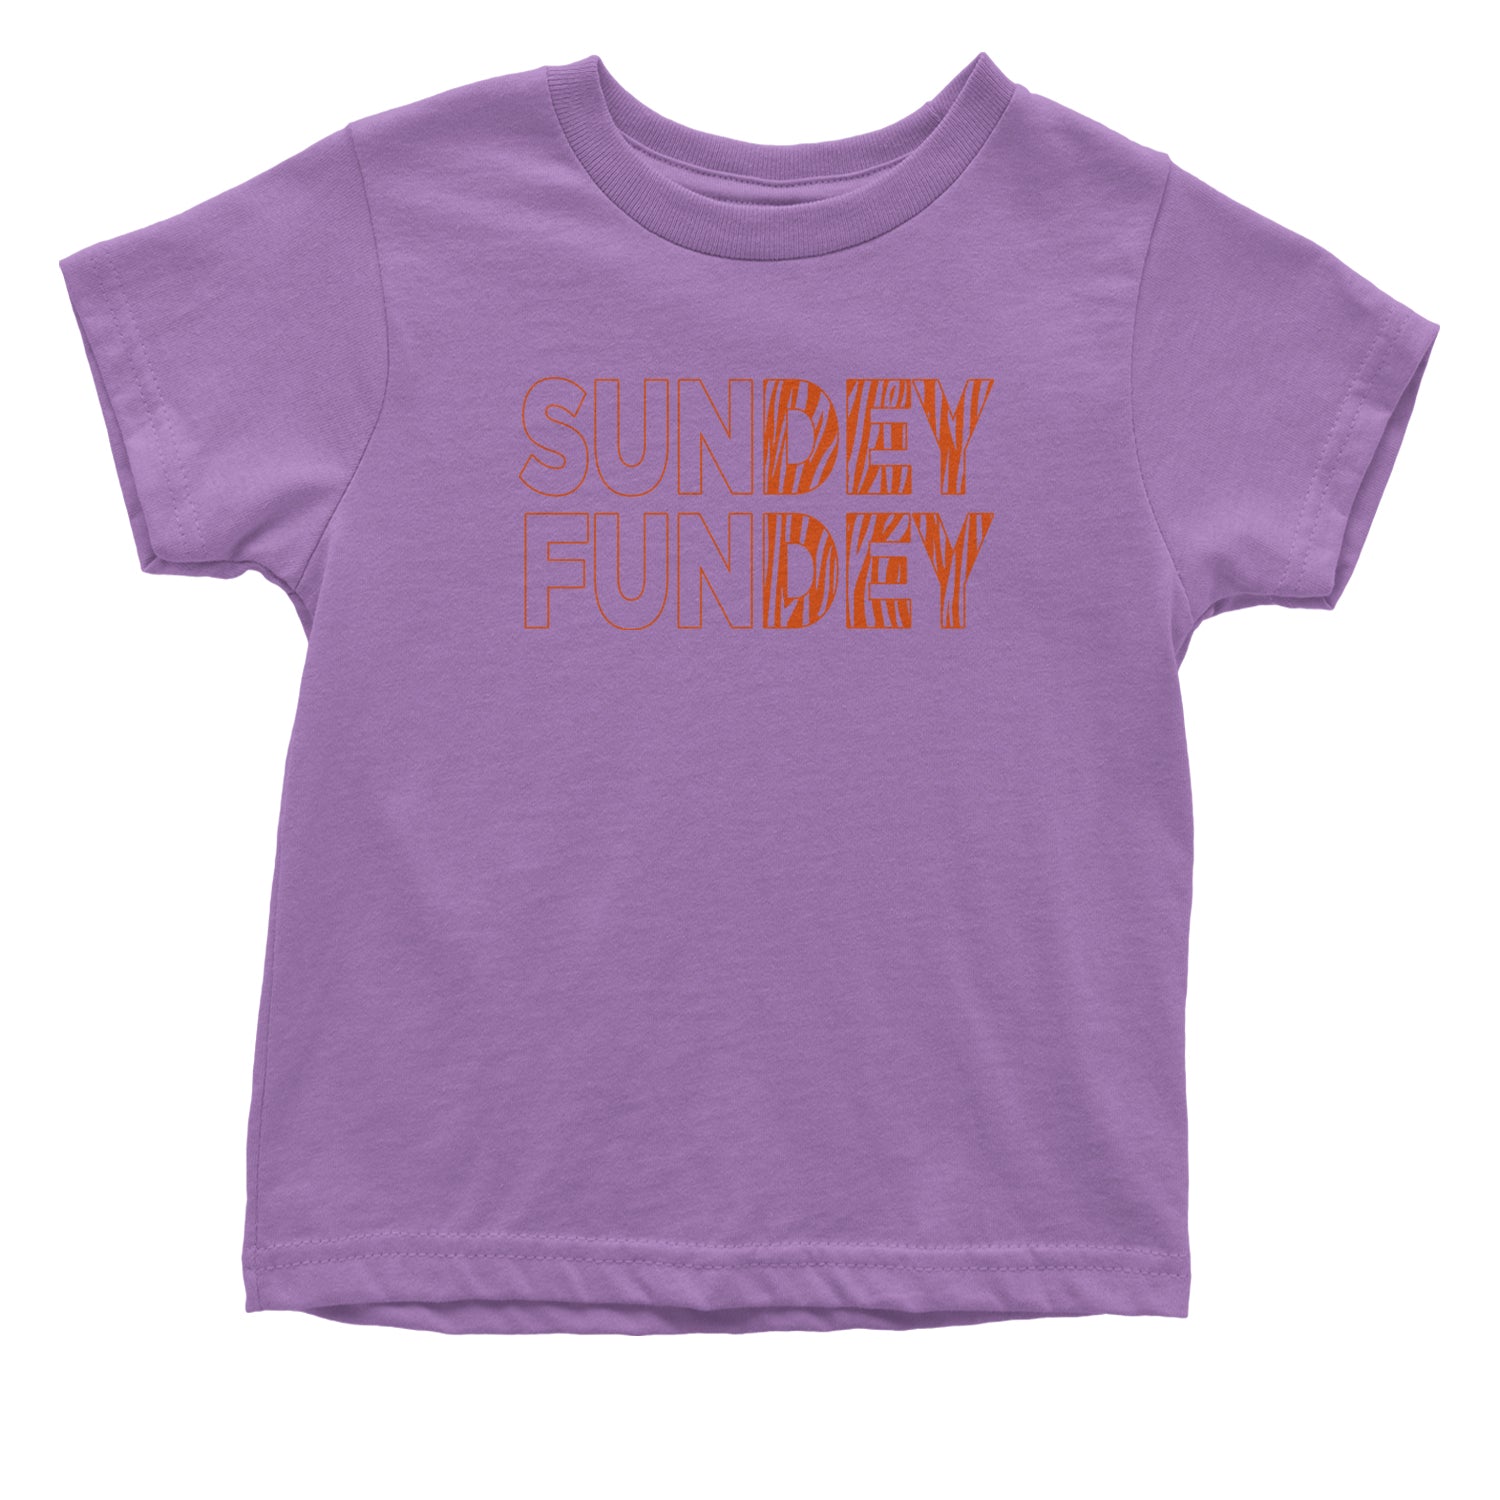 SunDEY FunDEY Sunday Funday Infant One-Piece Romper Bodysuit and Toddler T-shirt ball, burrow, dey, foot, football, joe, ohio, sports, who by Expression Tees